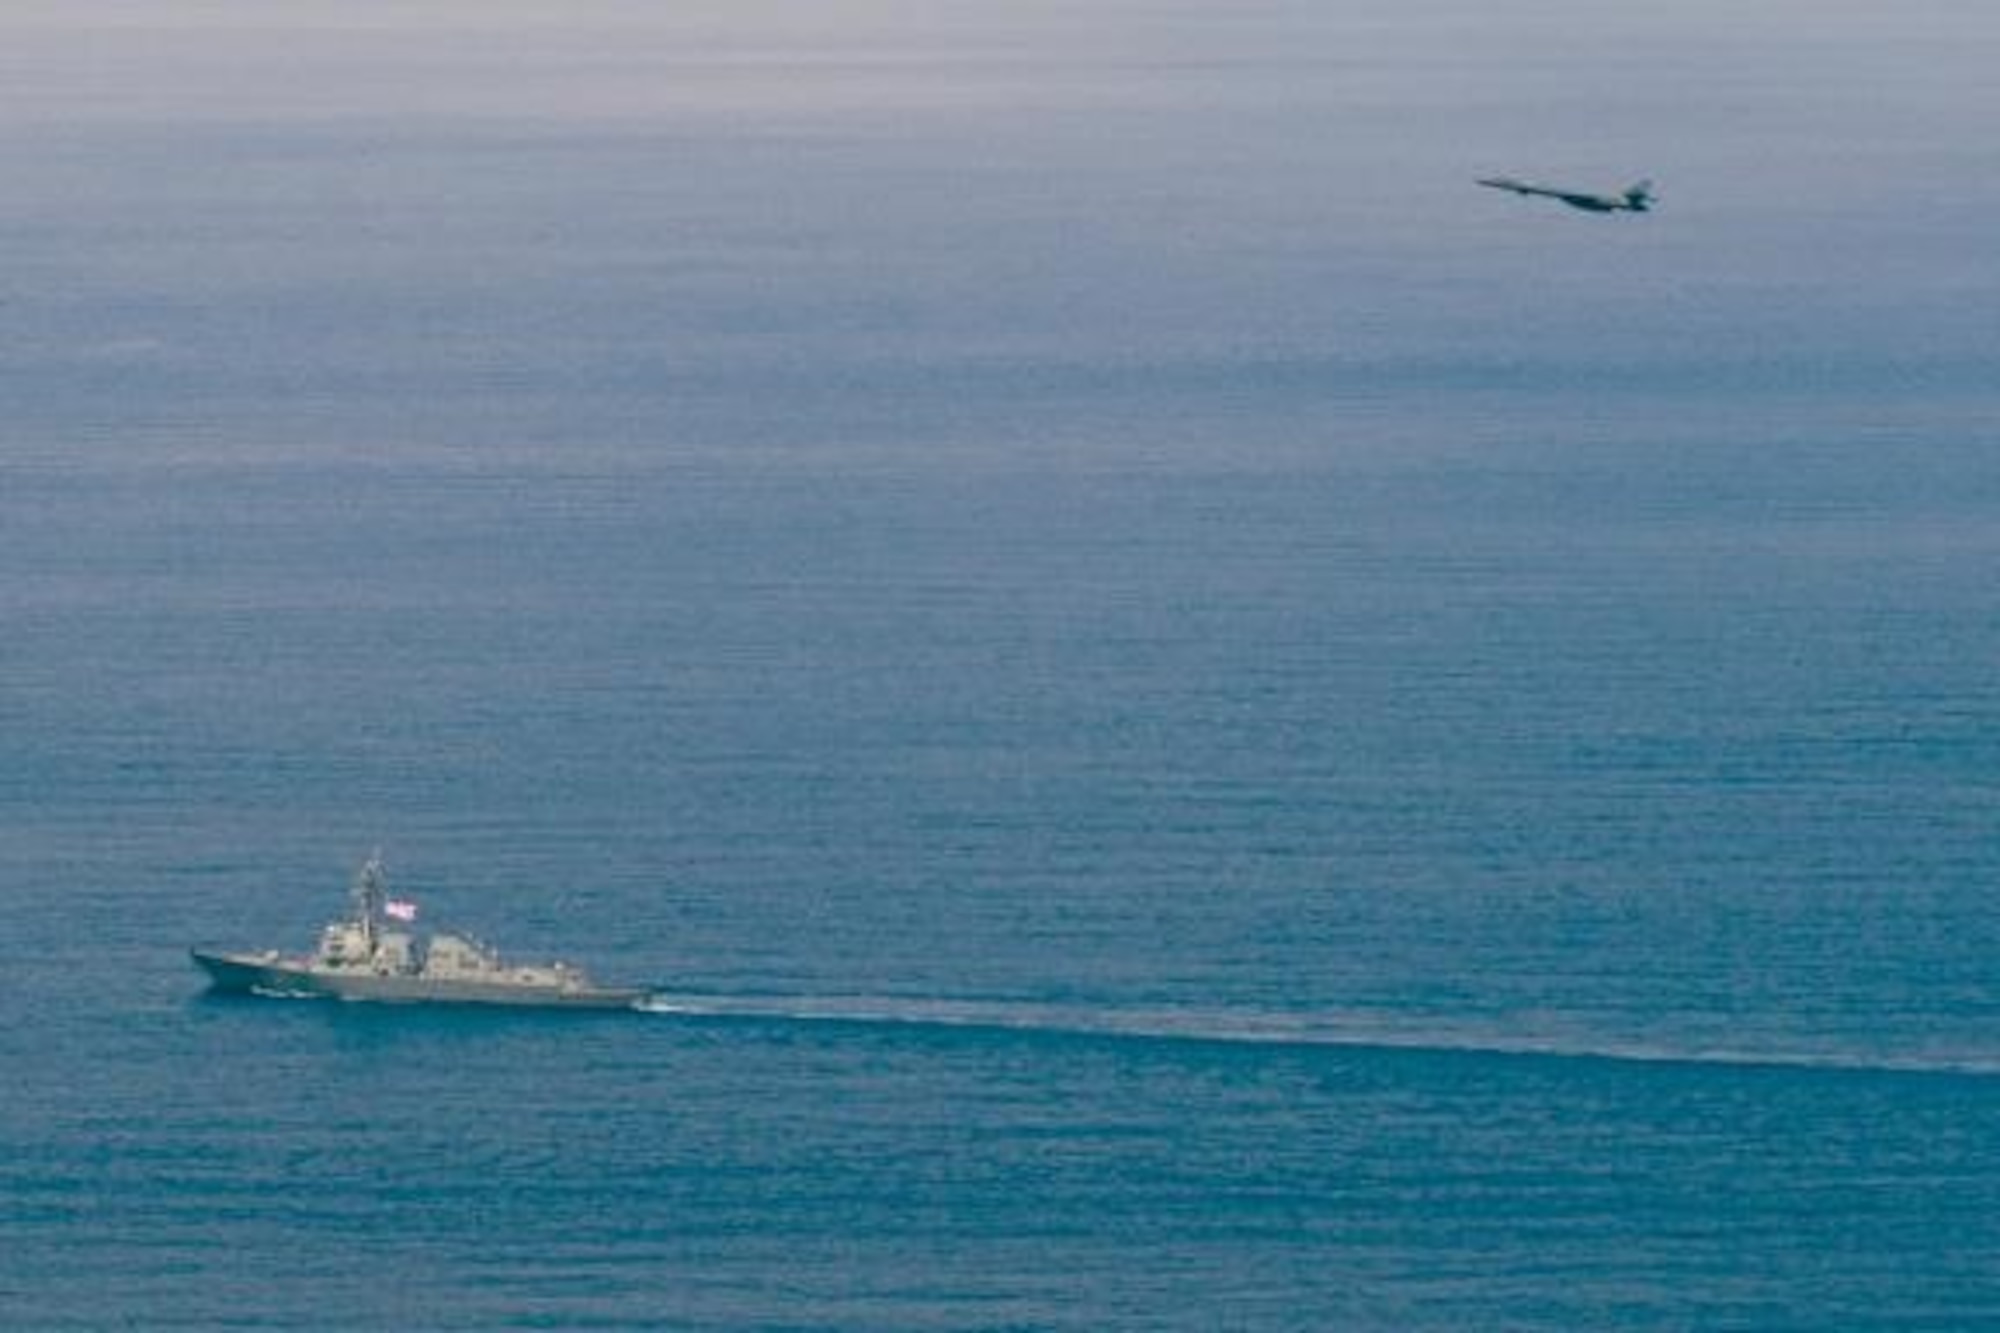 An Air Force B-1B Lancer strategic bomber assigned to the 9th Expeditionary Bomb Squadron flies over Arleigh Burke-class guided-missile destroyer USS Sterett (DDG 104) as the ship and aircraft operate in the South China Sea. Sterett is part of the Sterett-Dewey Surface Action Group and is the third deploying group operating under the command and control construct called 3rd Fleet Forward. U.S. 3rd Fleet operating forward offers additional options to the Pacific Fleet commander by leveraging the capabilities of 3rd and 7th Fleets. (U.S. Navy photo by Mass Communication Specialist 1st Class Byron C. Linder/Released)